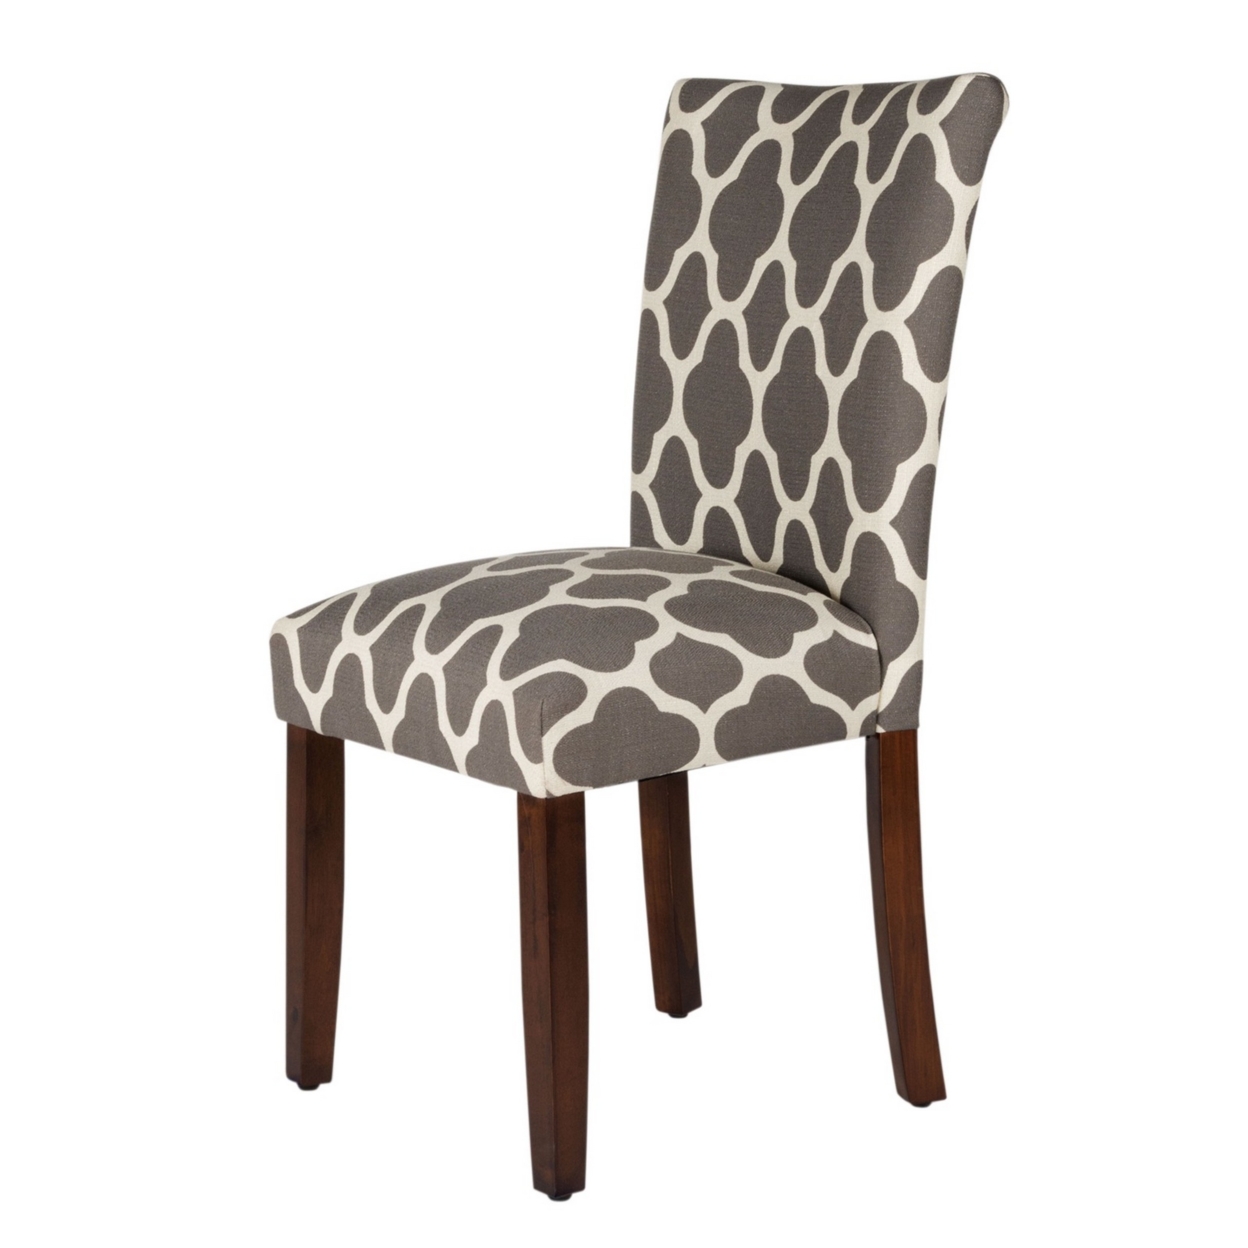 Wooden Parson Dining Chair With Quatrefoil Pattern Fabric Upholstery, Gray And White, Set Of Two- Saltoro Sherpi